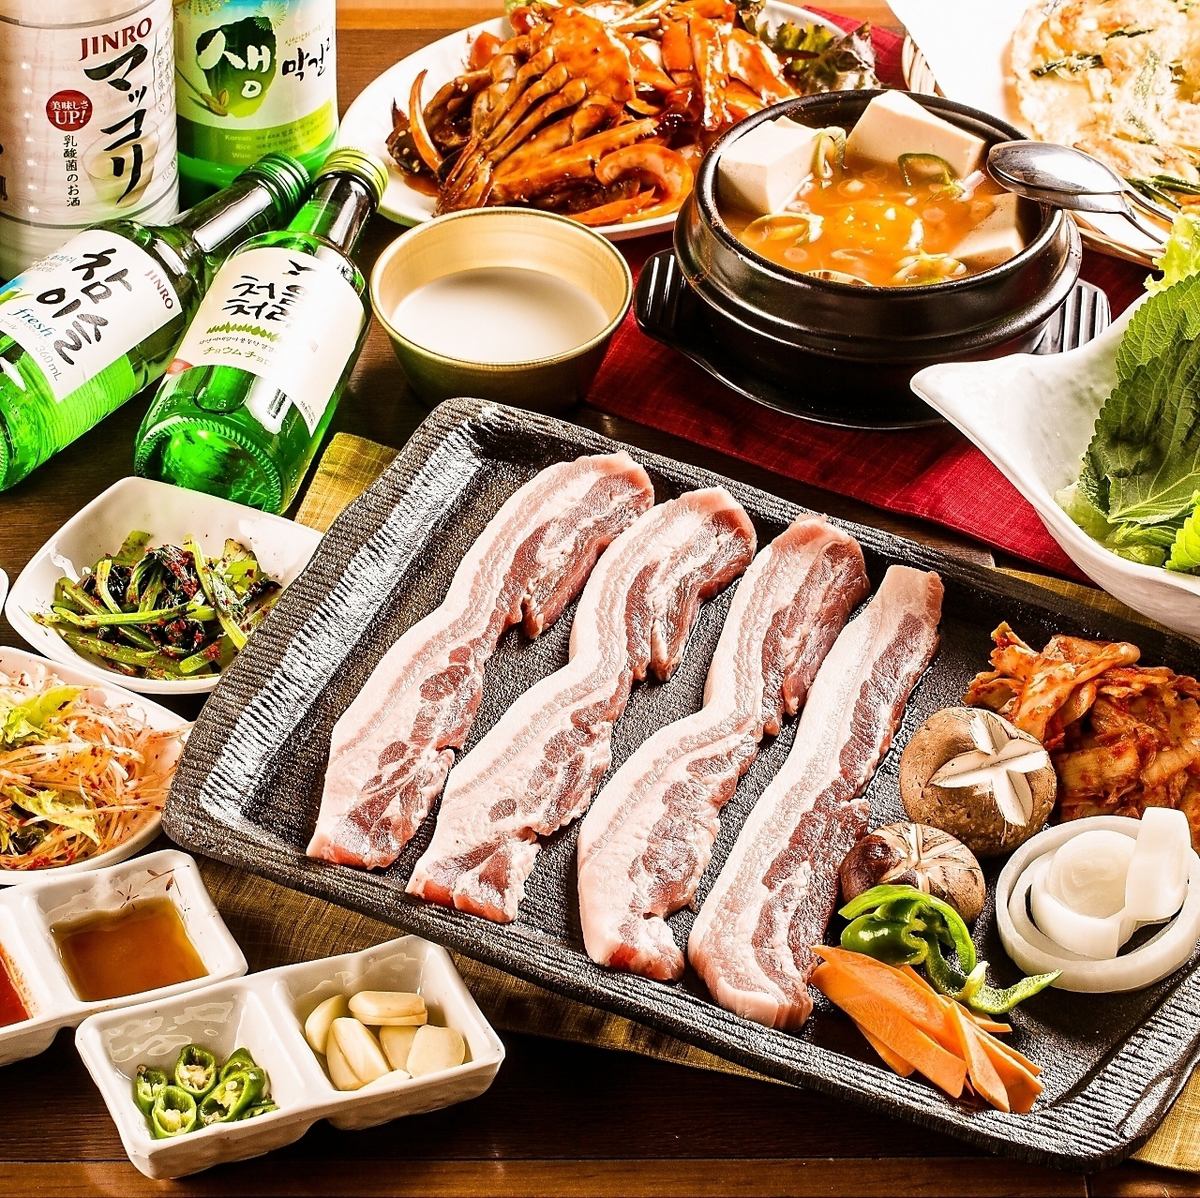 Popular in Shibuya! Enjoy samgyeopsal with vegetables in a neon-lit store